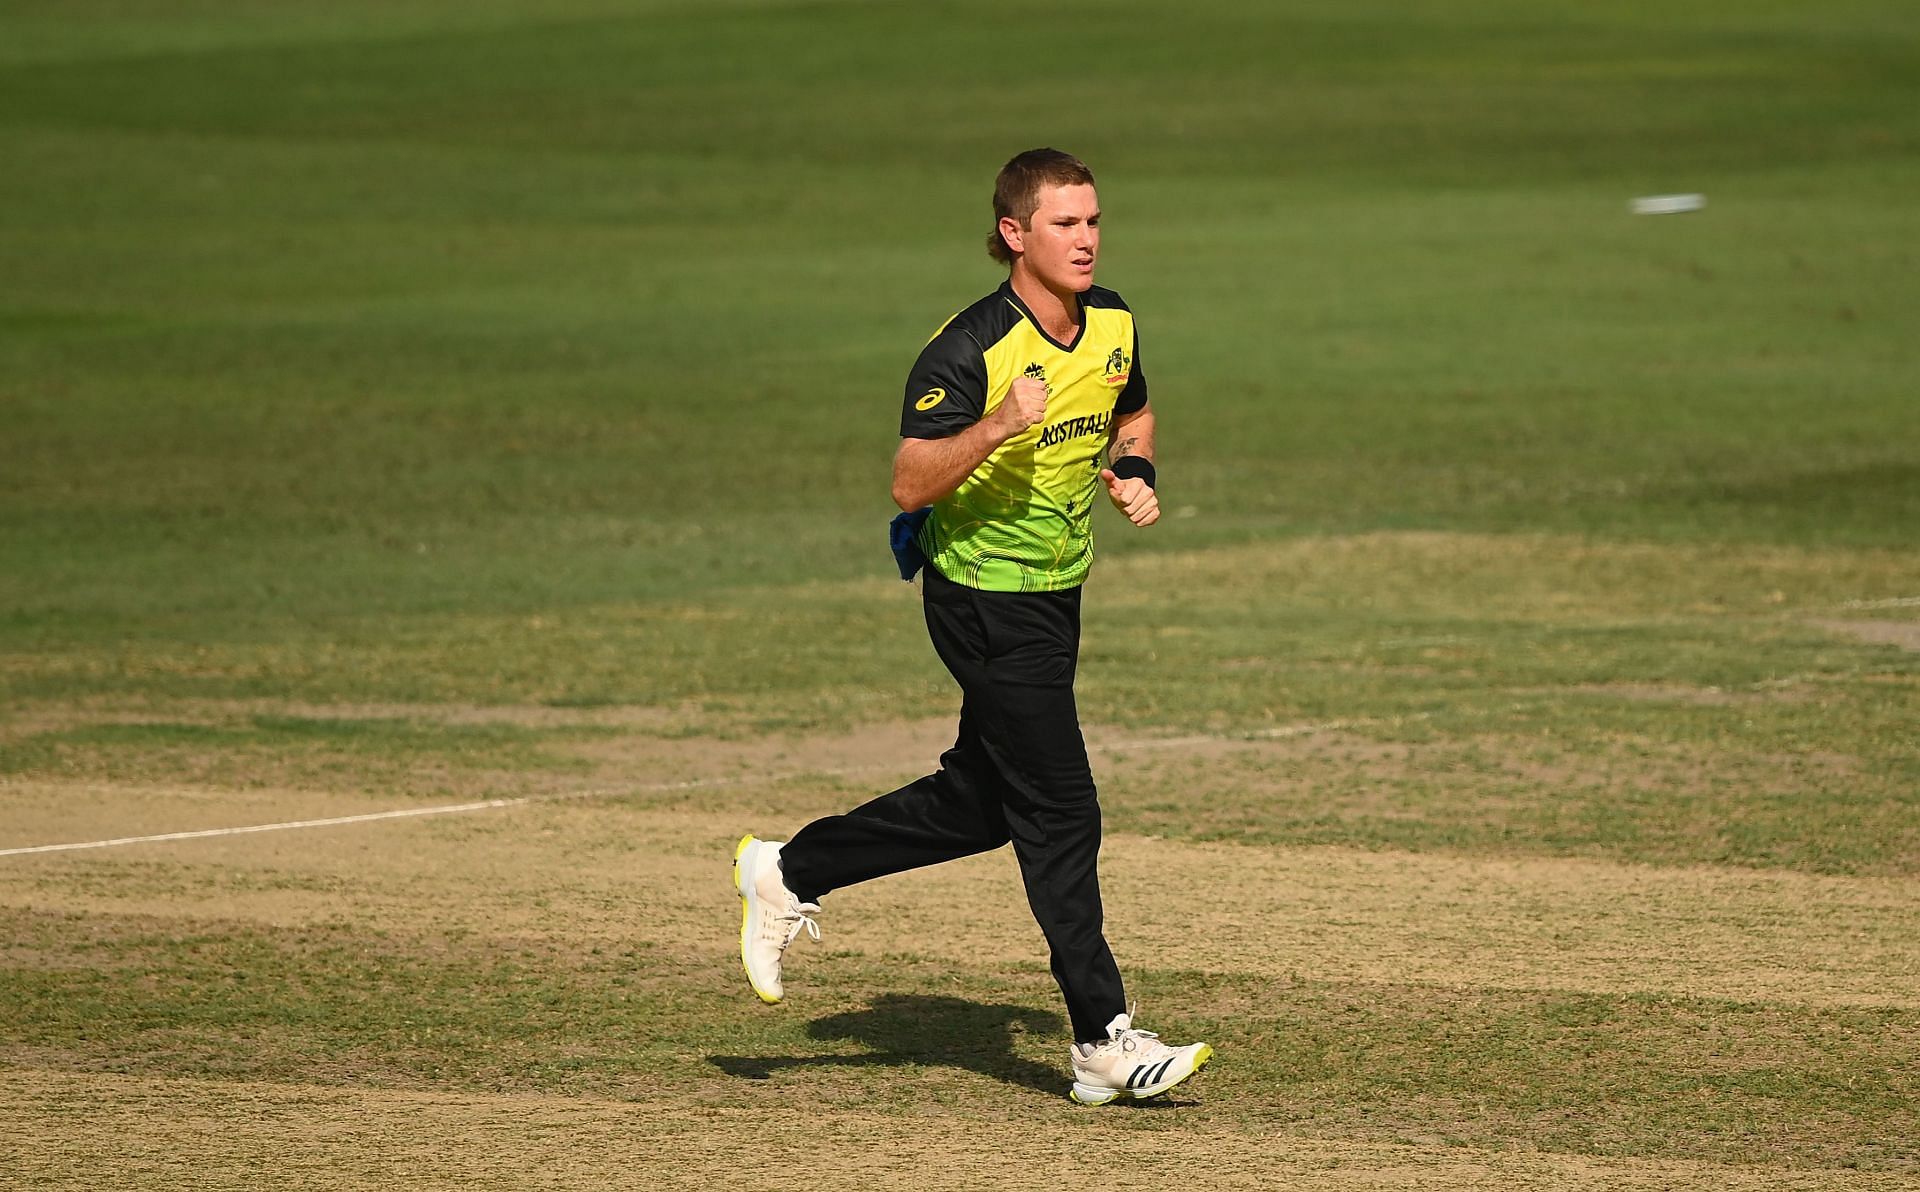 The onus will be on Adam Zampa to deliver with the ball against Pakistan